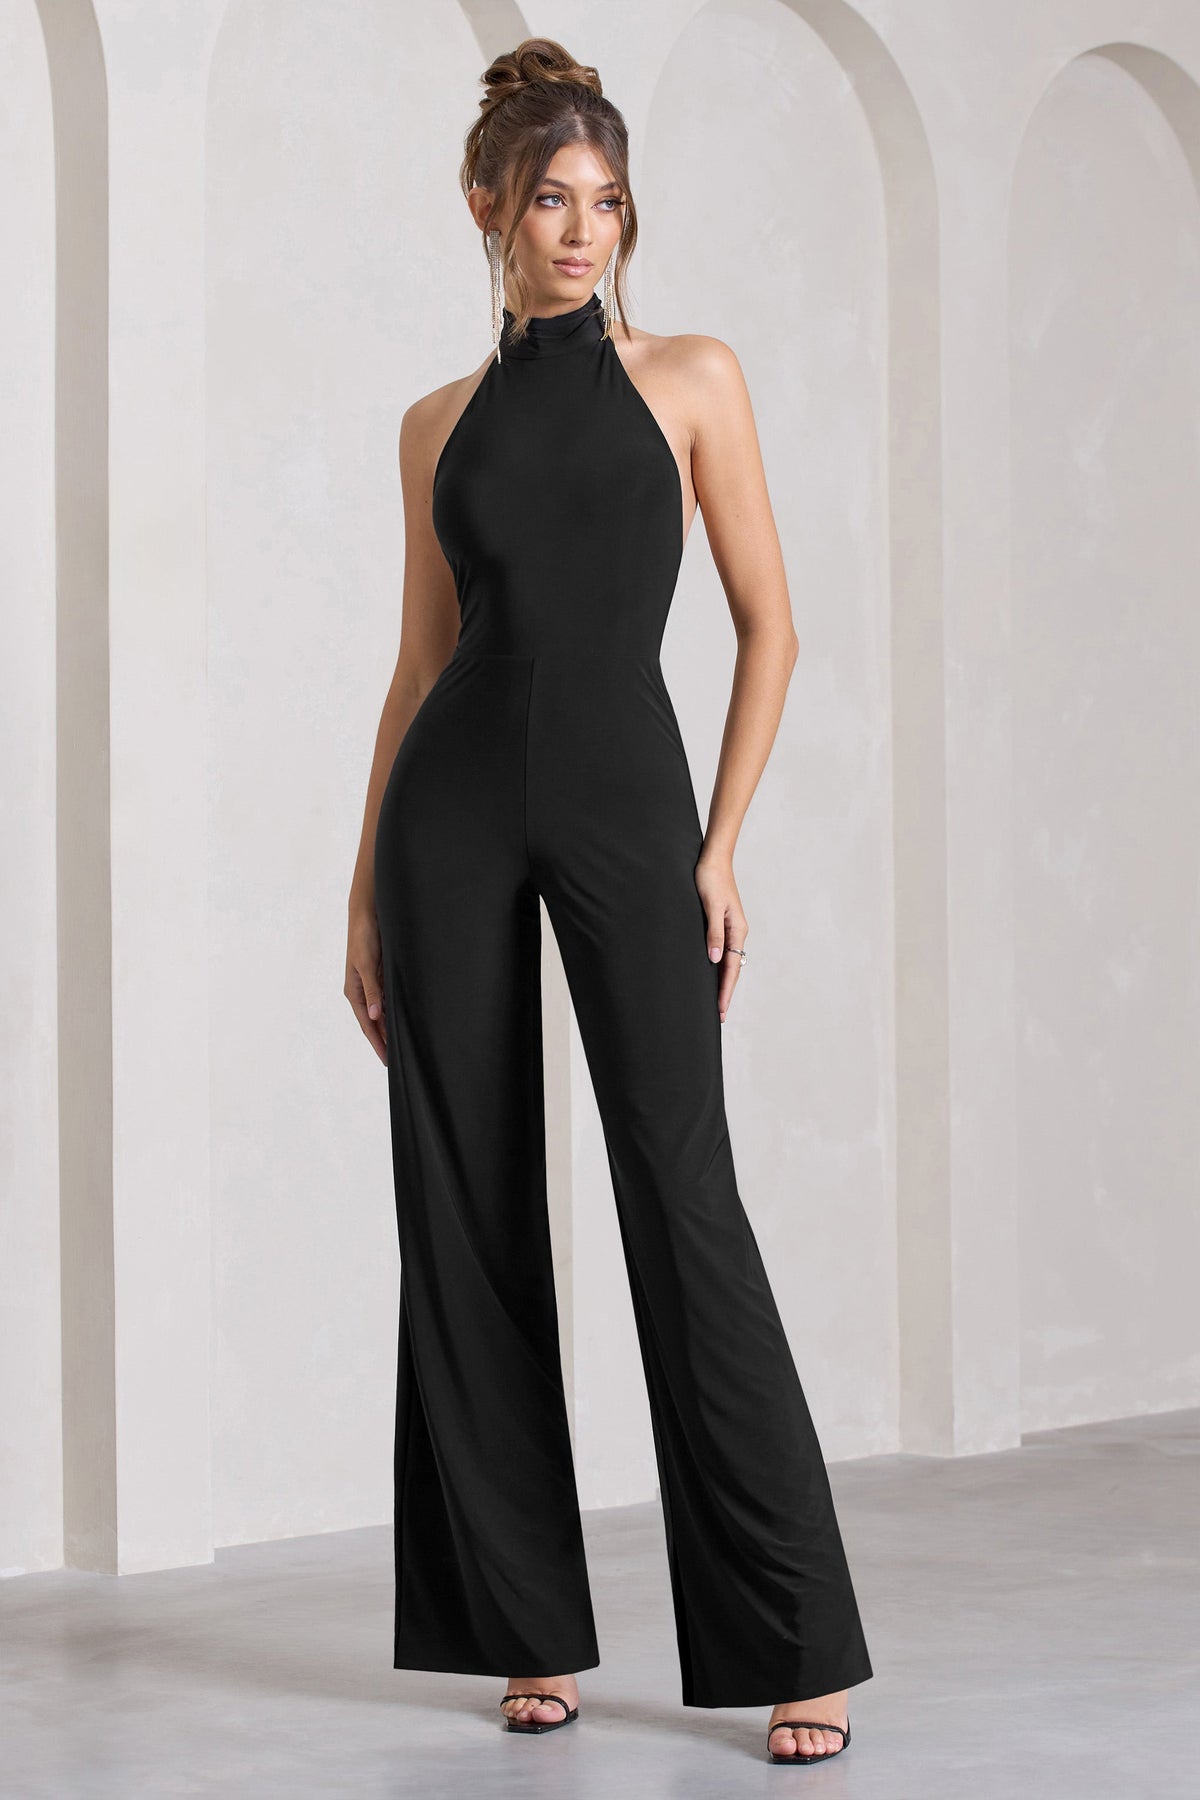 Berta White Satin Formal Jumpsuits For Prom With Long Sleeves, Jacket, And  Plus Size Options Perfect For Evening Gowns, Parties, Or Special Occasions  From Cplv1, $124.19 | DHgate.Com